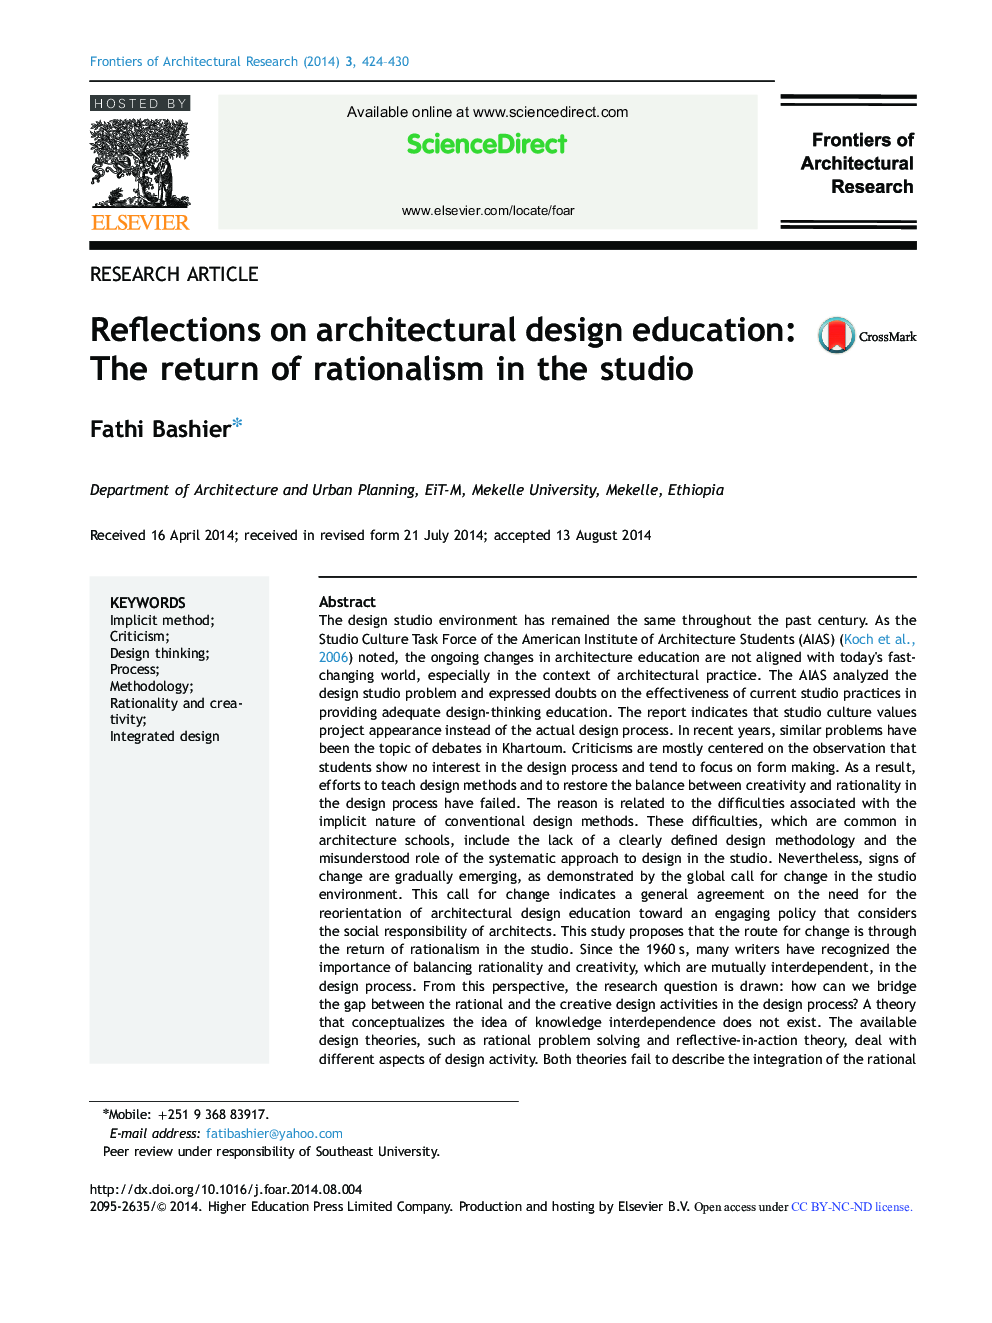 Reflections on architectural design education: The return of rationalism in the studio 